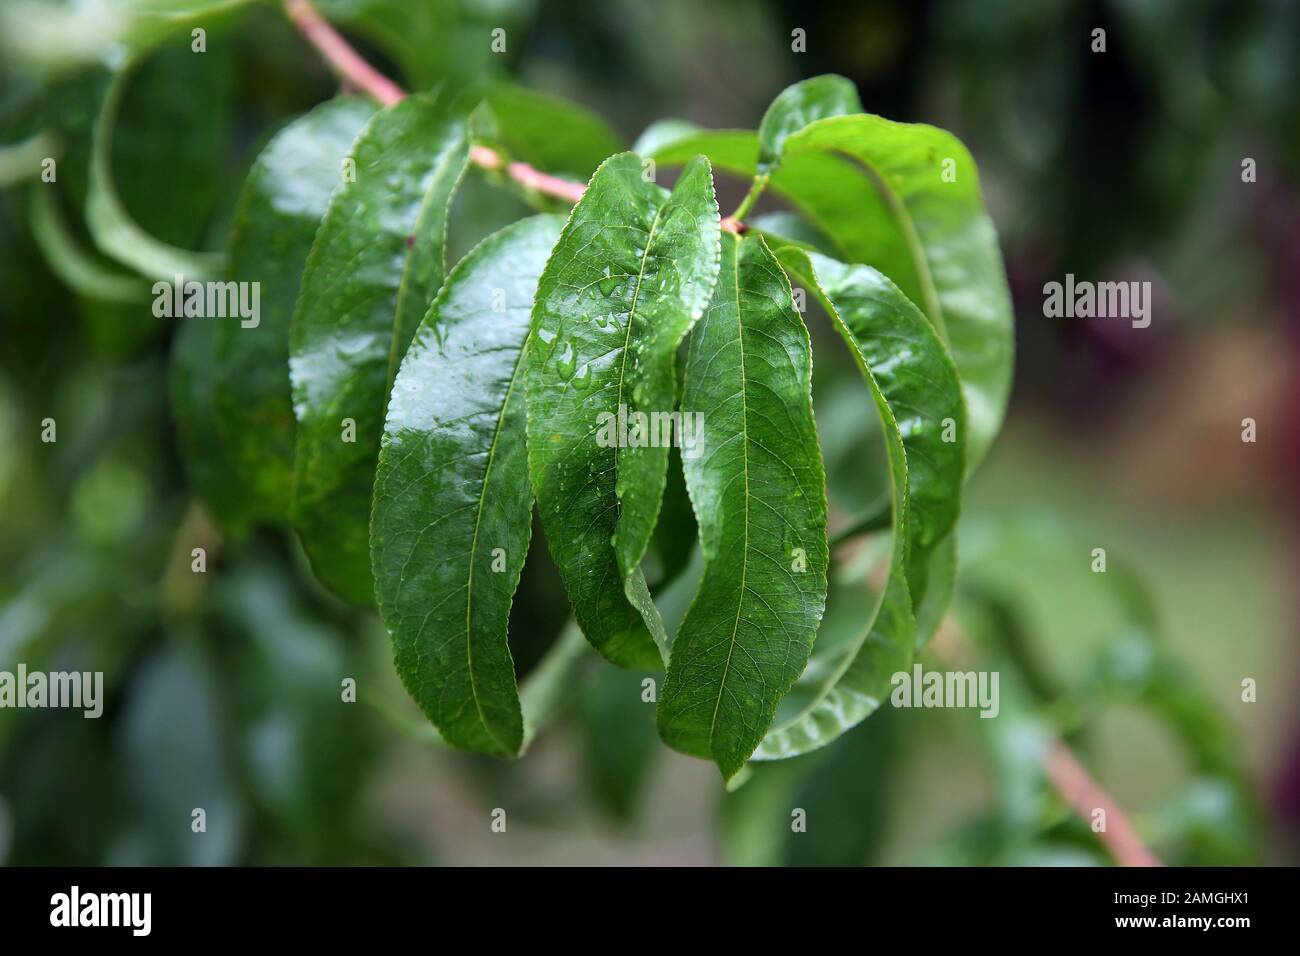 sick wrinkled green leaves and nectarine fruits in the garden on tree close-up macro.A Drop leaf Stock Photo